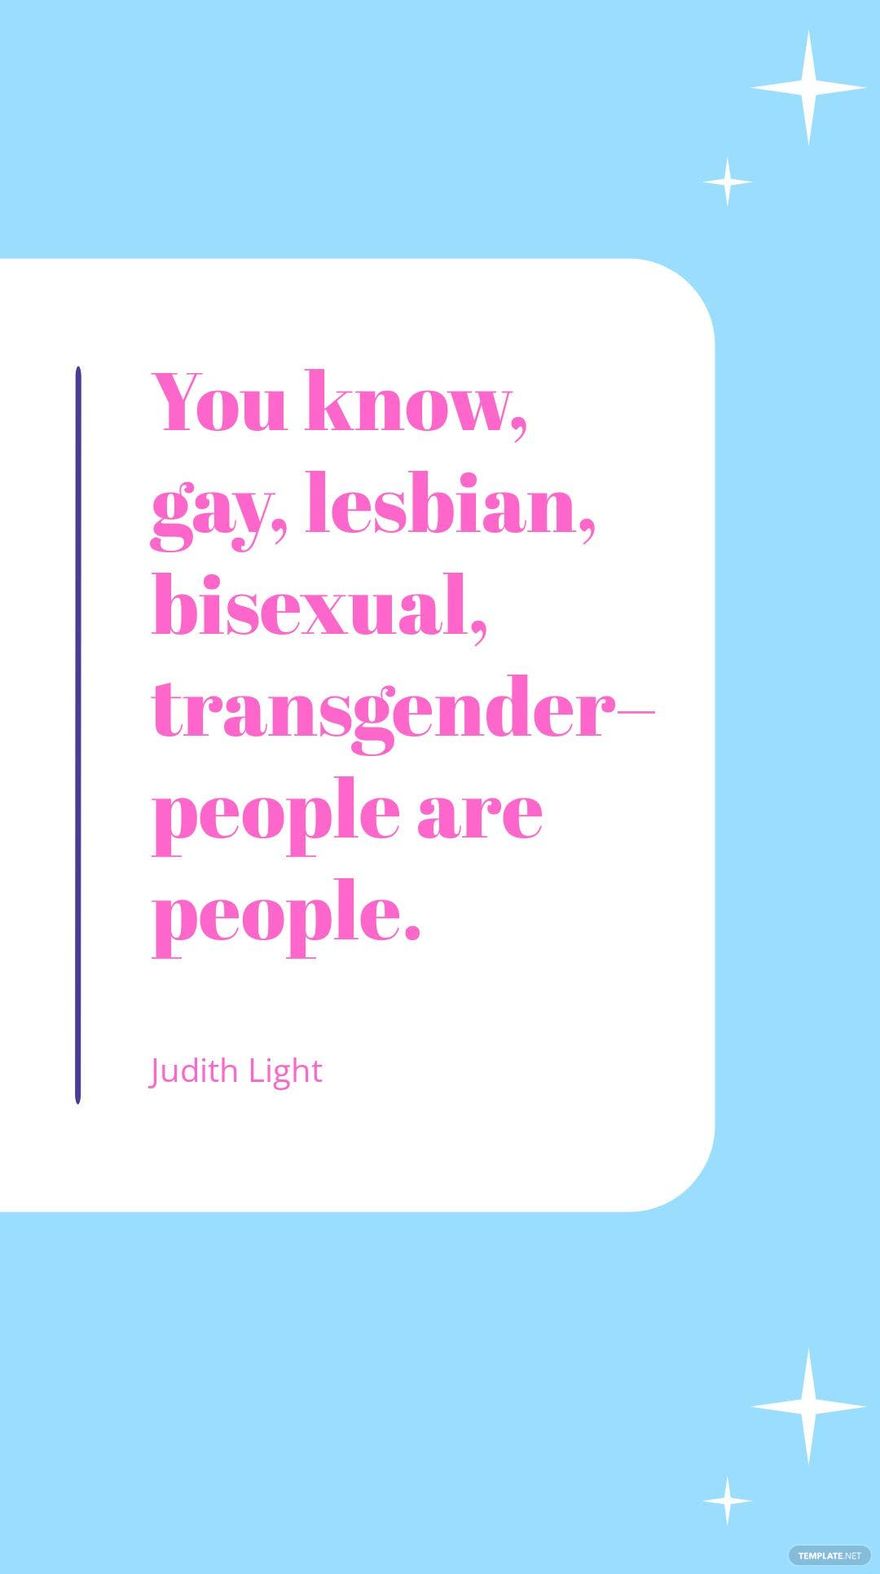 Judith Light - You know, gay, lesbian, bisexual, transgender – people are people.